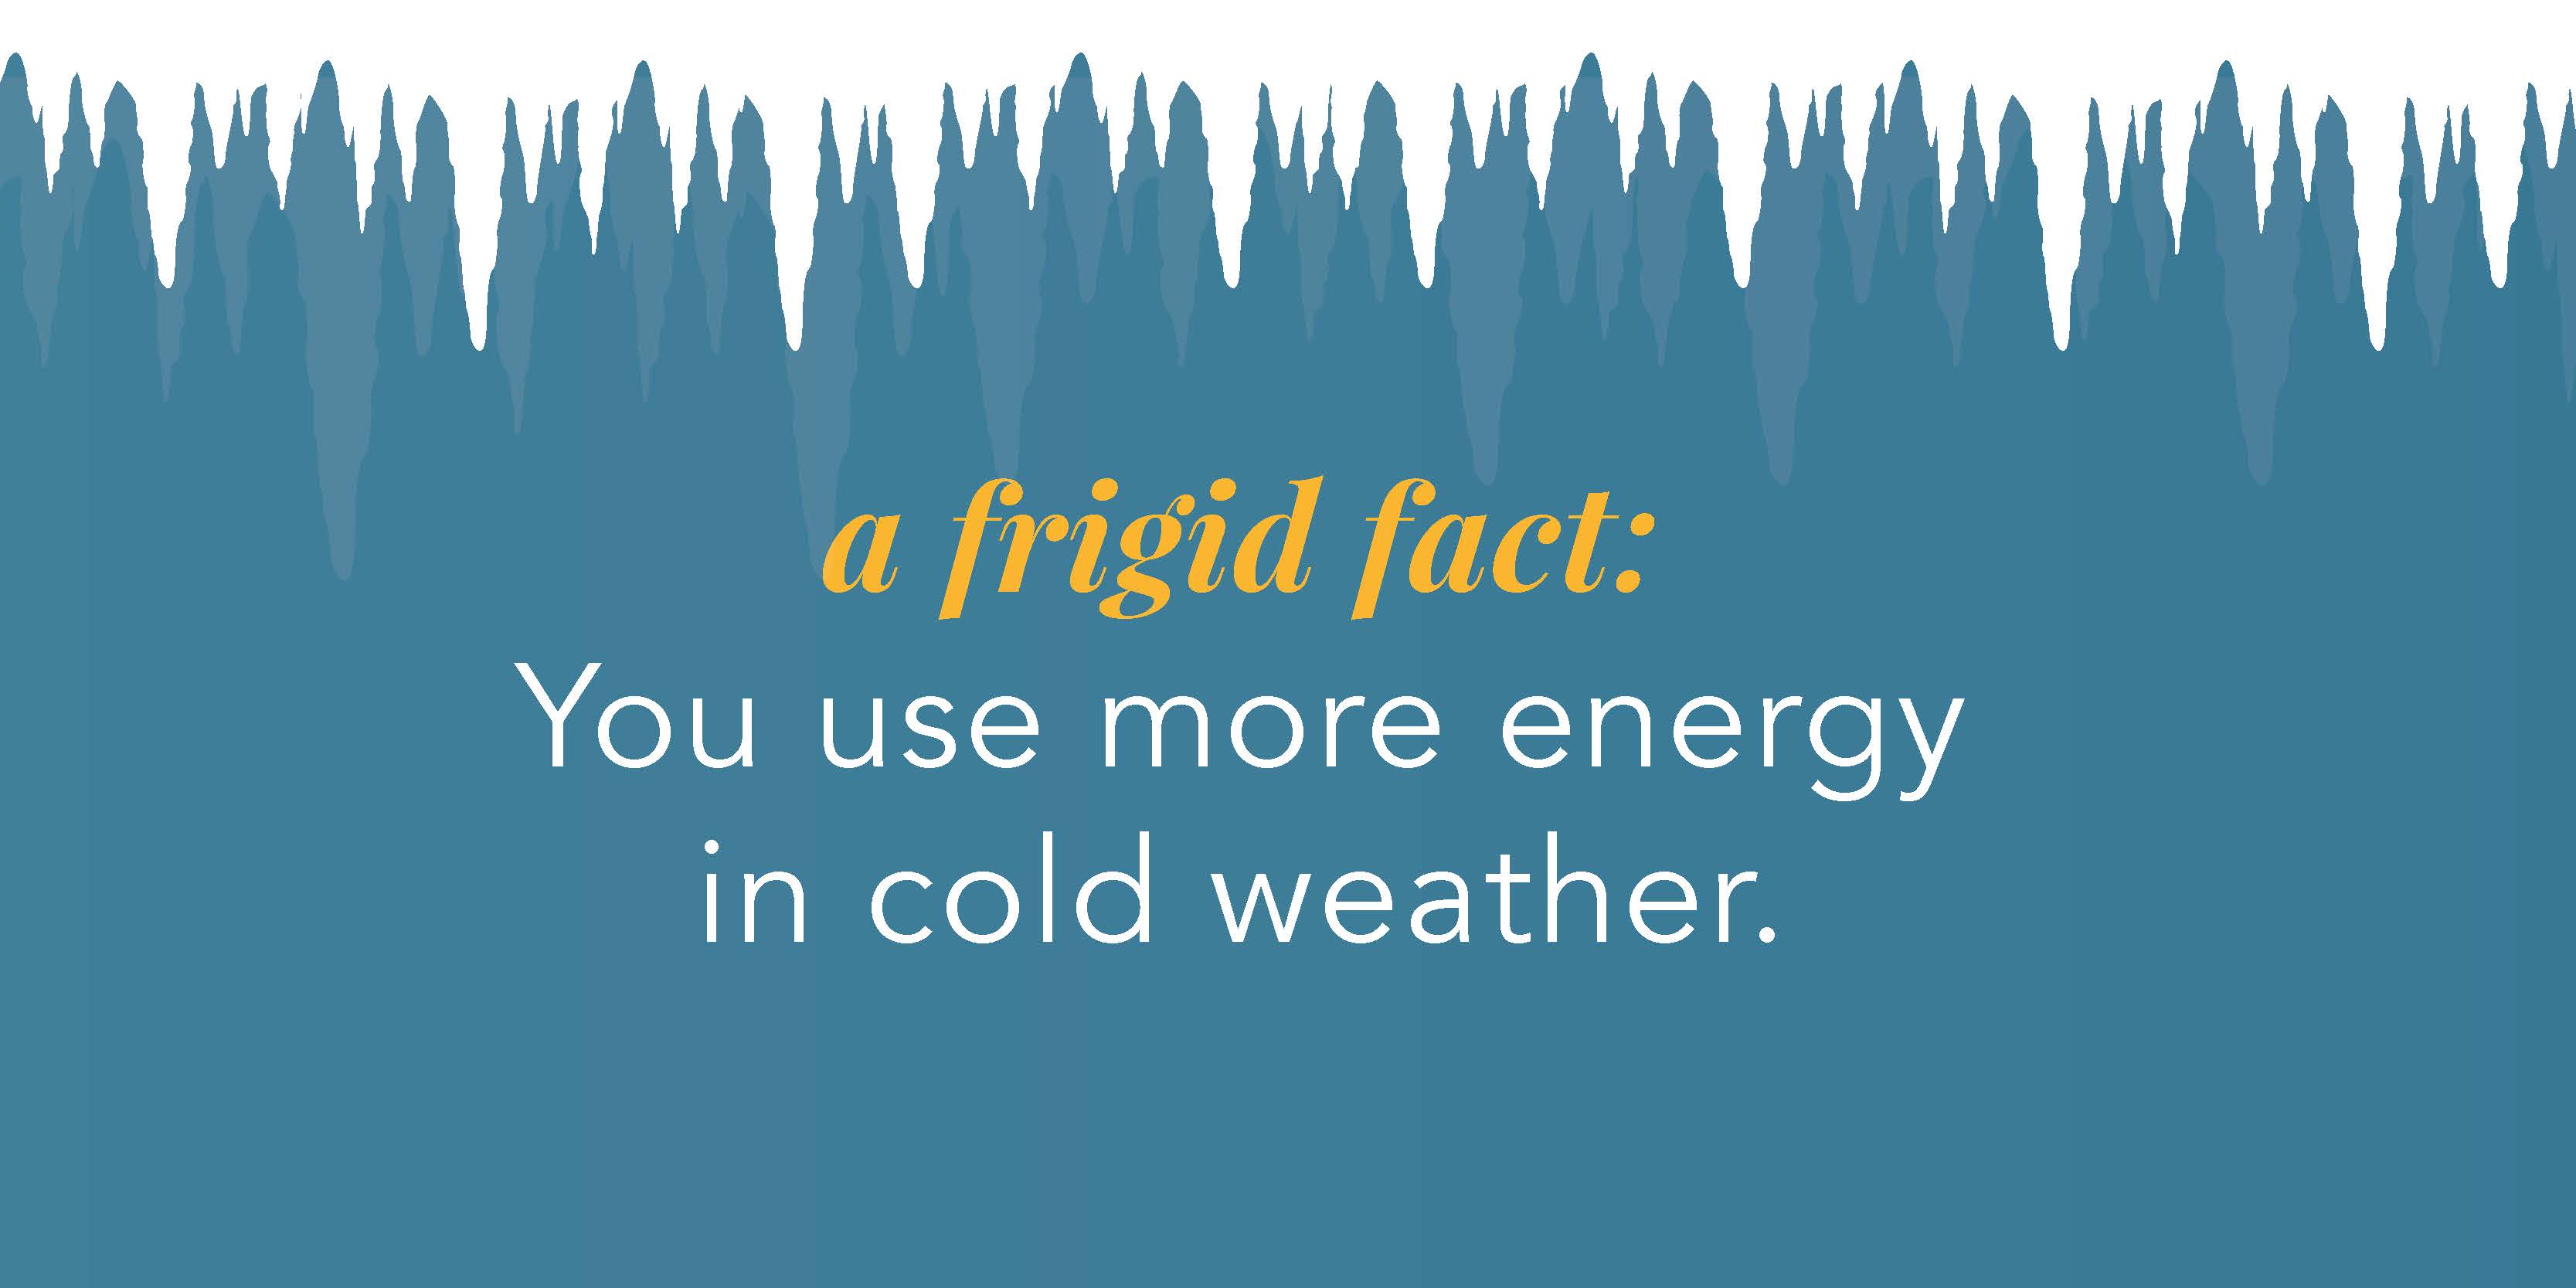 Icicles with snow and blue background under text that reads " A frigid fact: You use more energy in cold weather." 